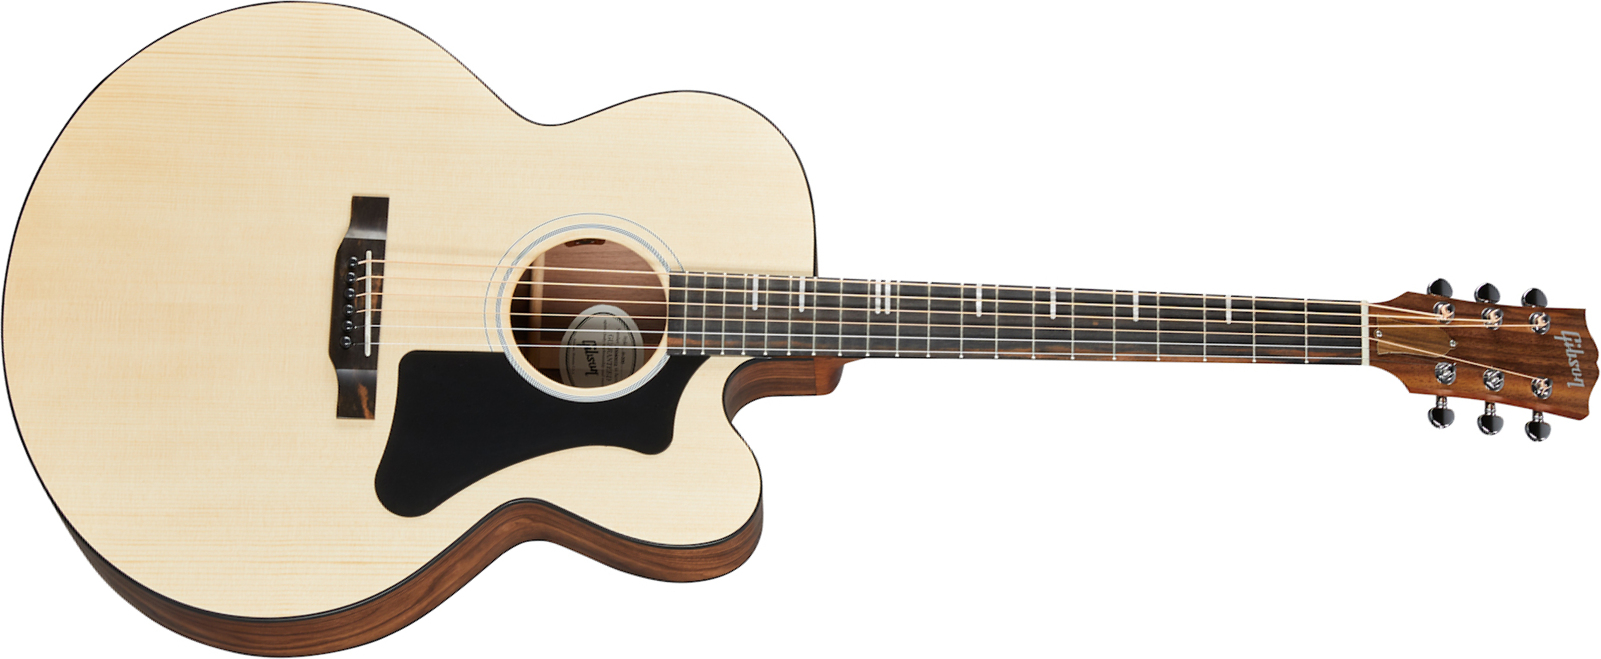 Gibson G-200 Ec Jumbo Modern Cw Epicea Noyer Wal Eb - Natural Satin - Guitare Electro Acoustique - Main picture